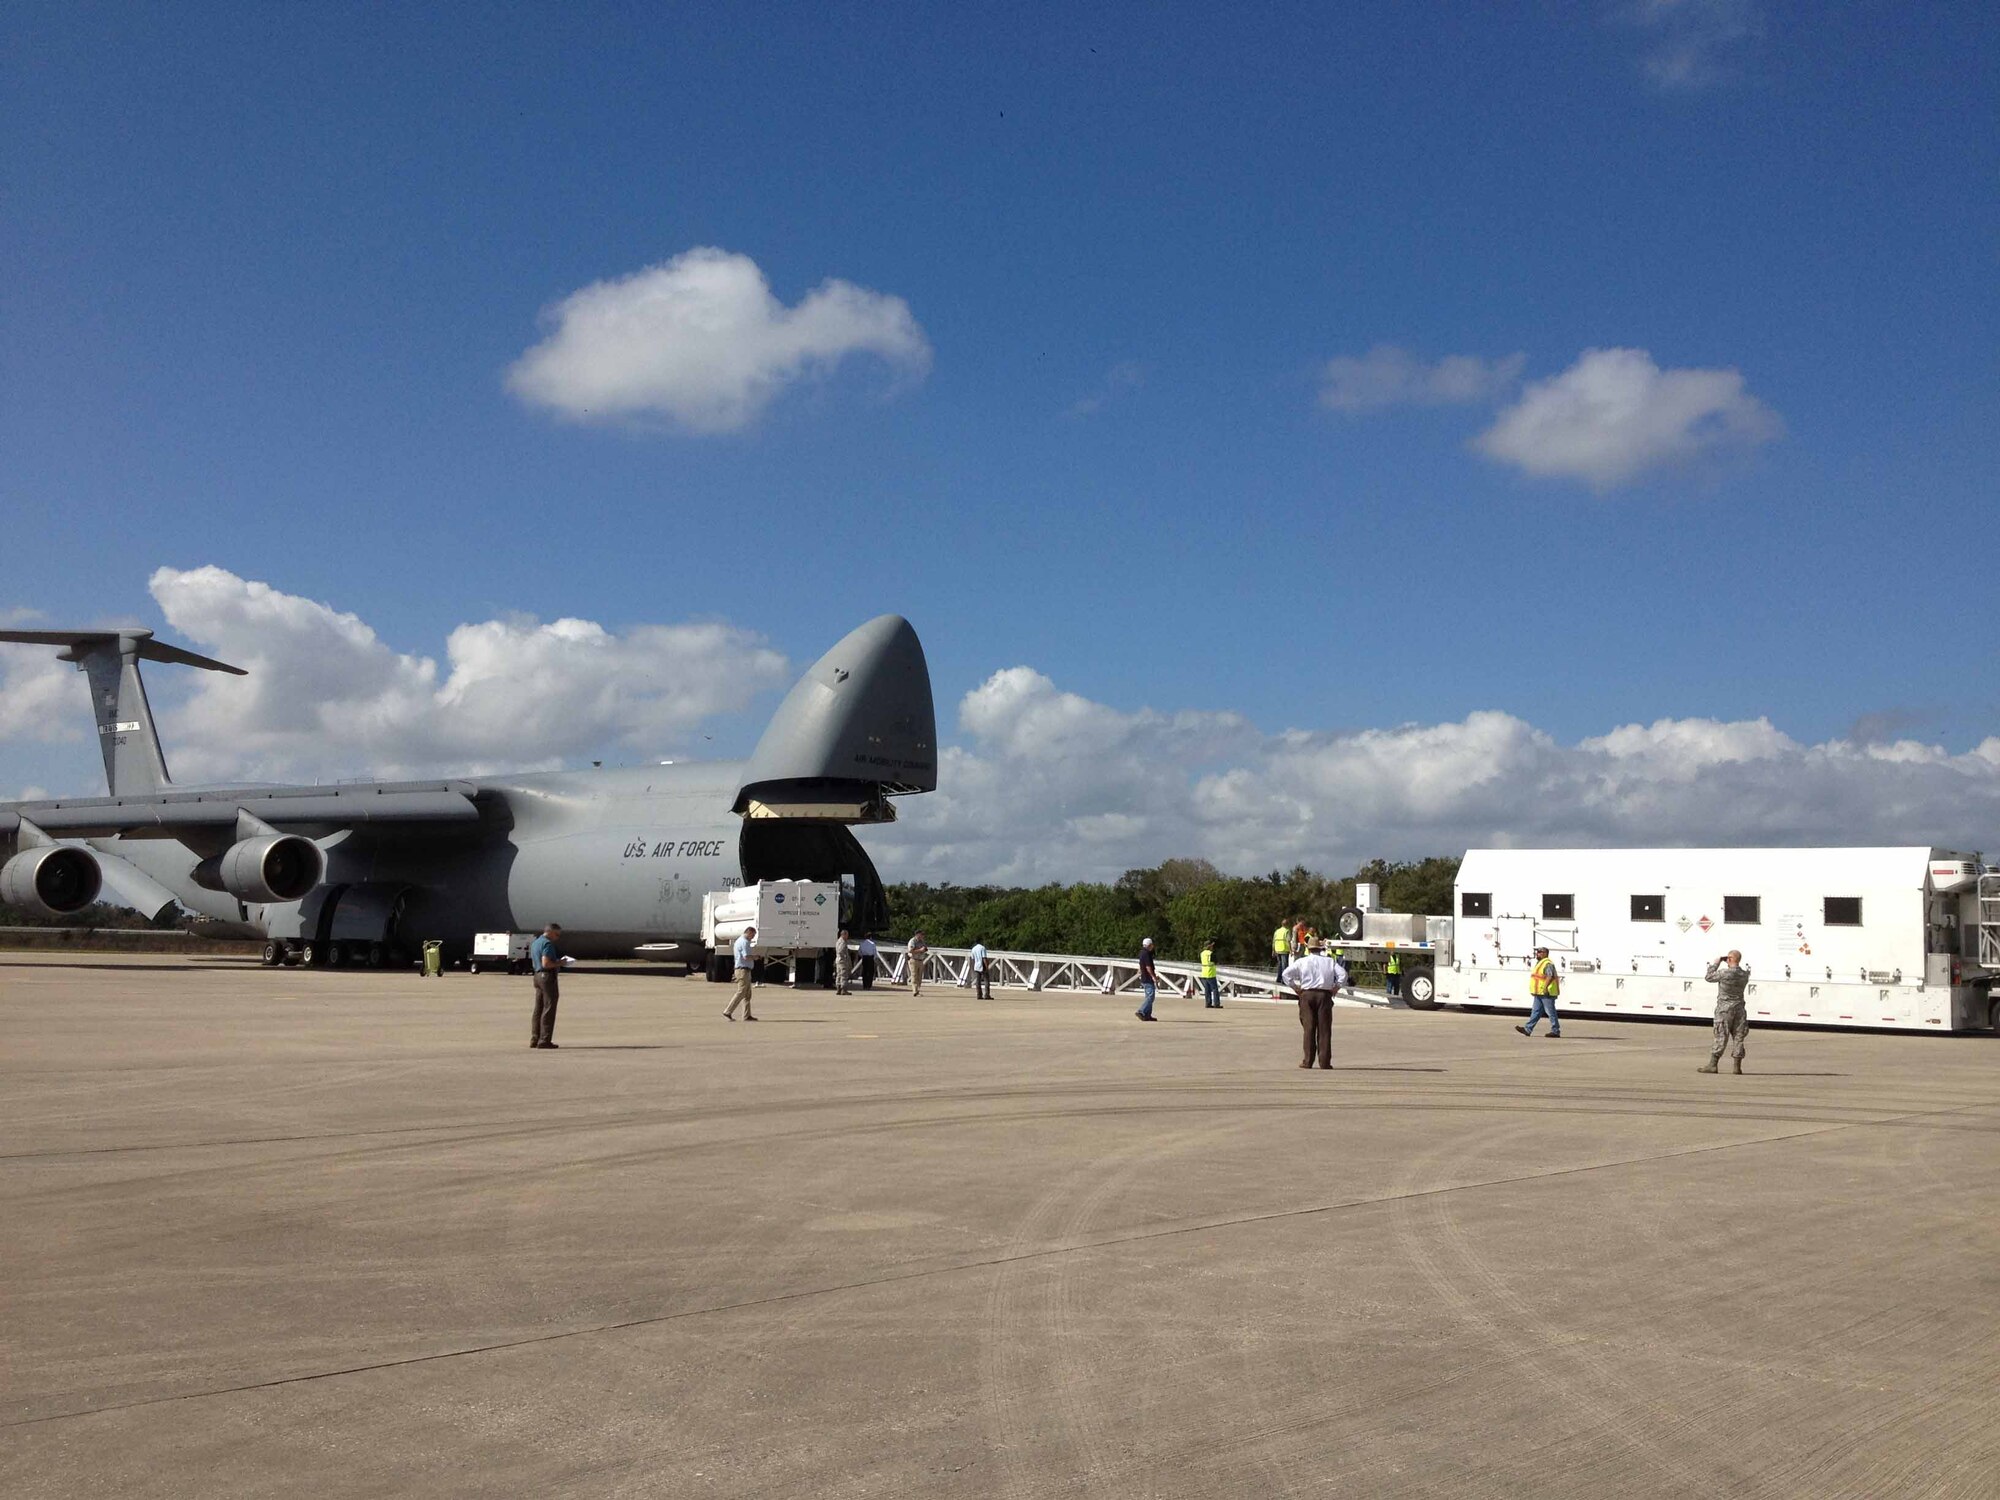 The U.S. Air Force's fourth Wideband Global satellite communication spacecraft arrived at the Shuttle Landing Facility at Kennedy Space Center, Fla., Nov. 15. Photo by Capt. Joseph Maguadog, Military Satellite Communications Systems Directorate, Space and Missile Systems Center.